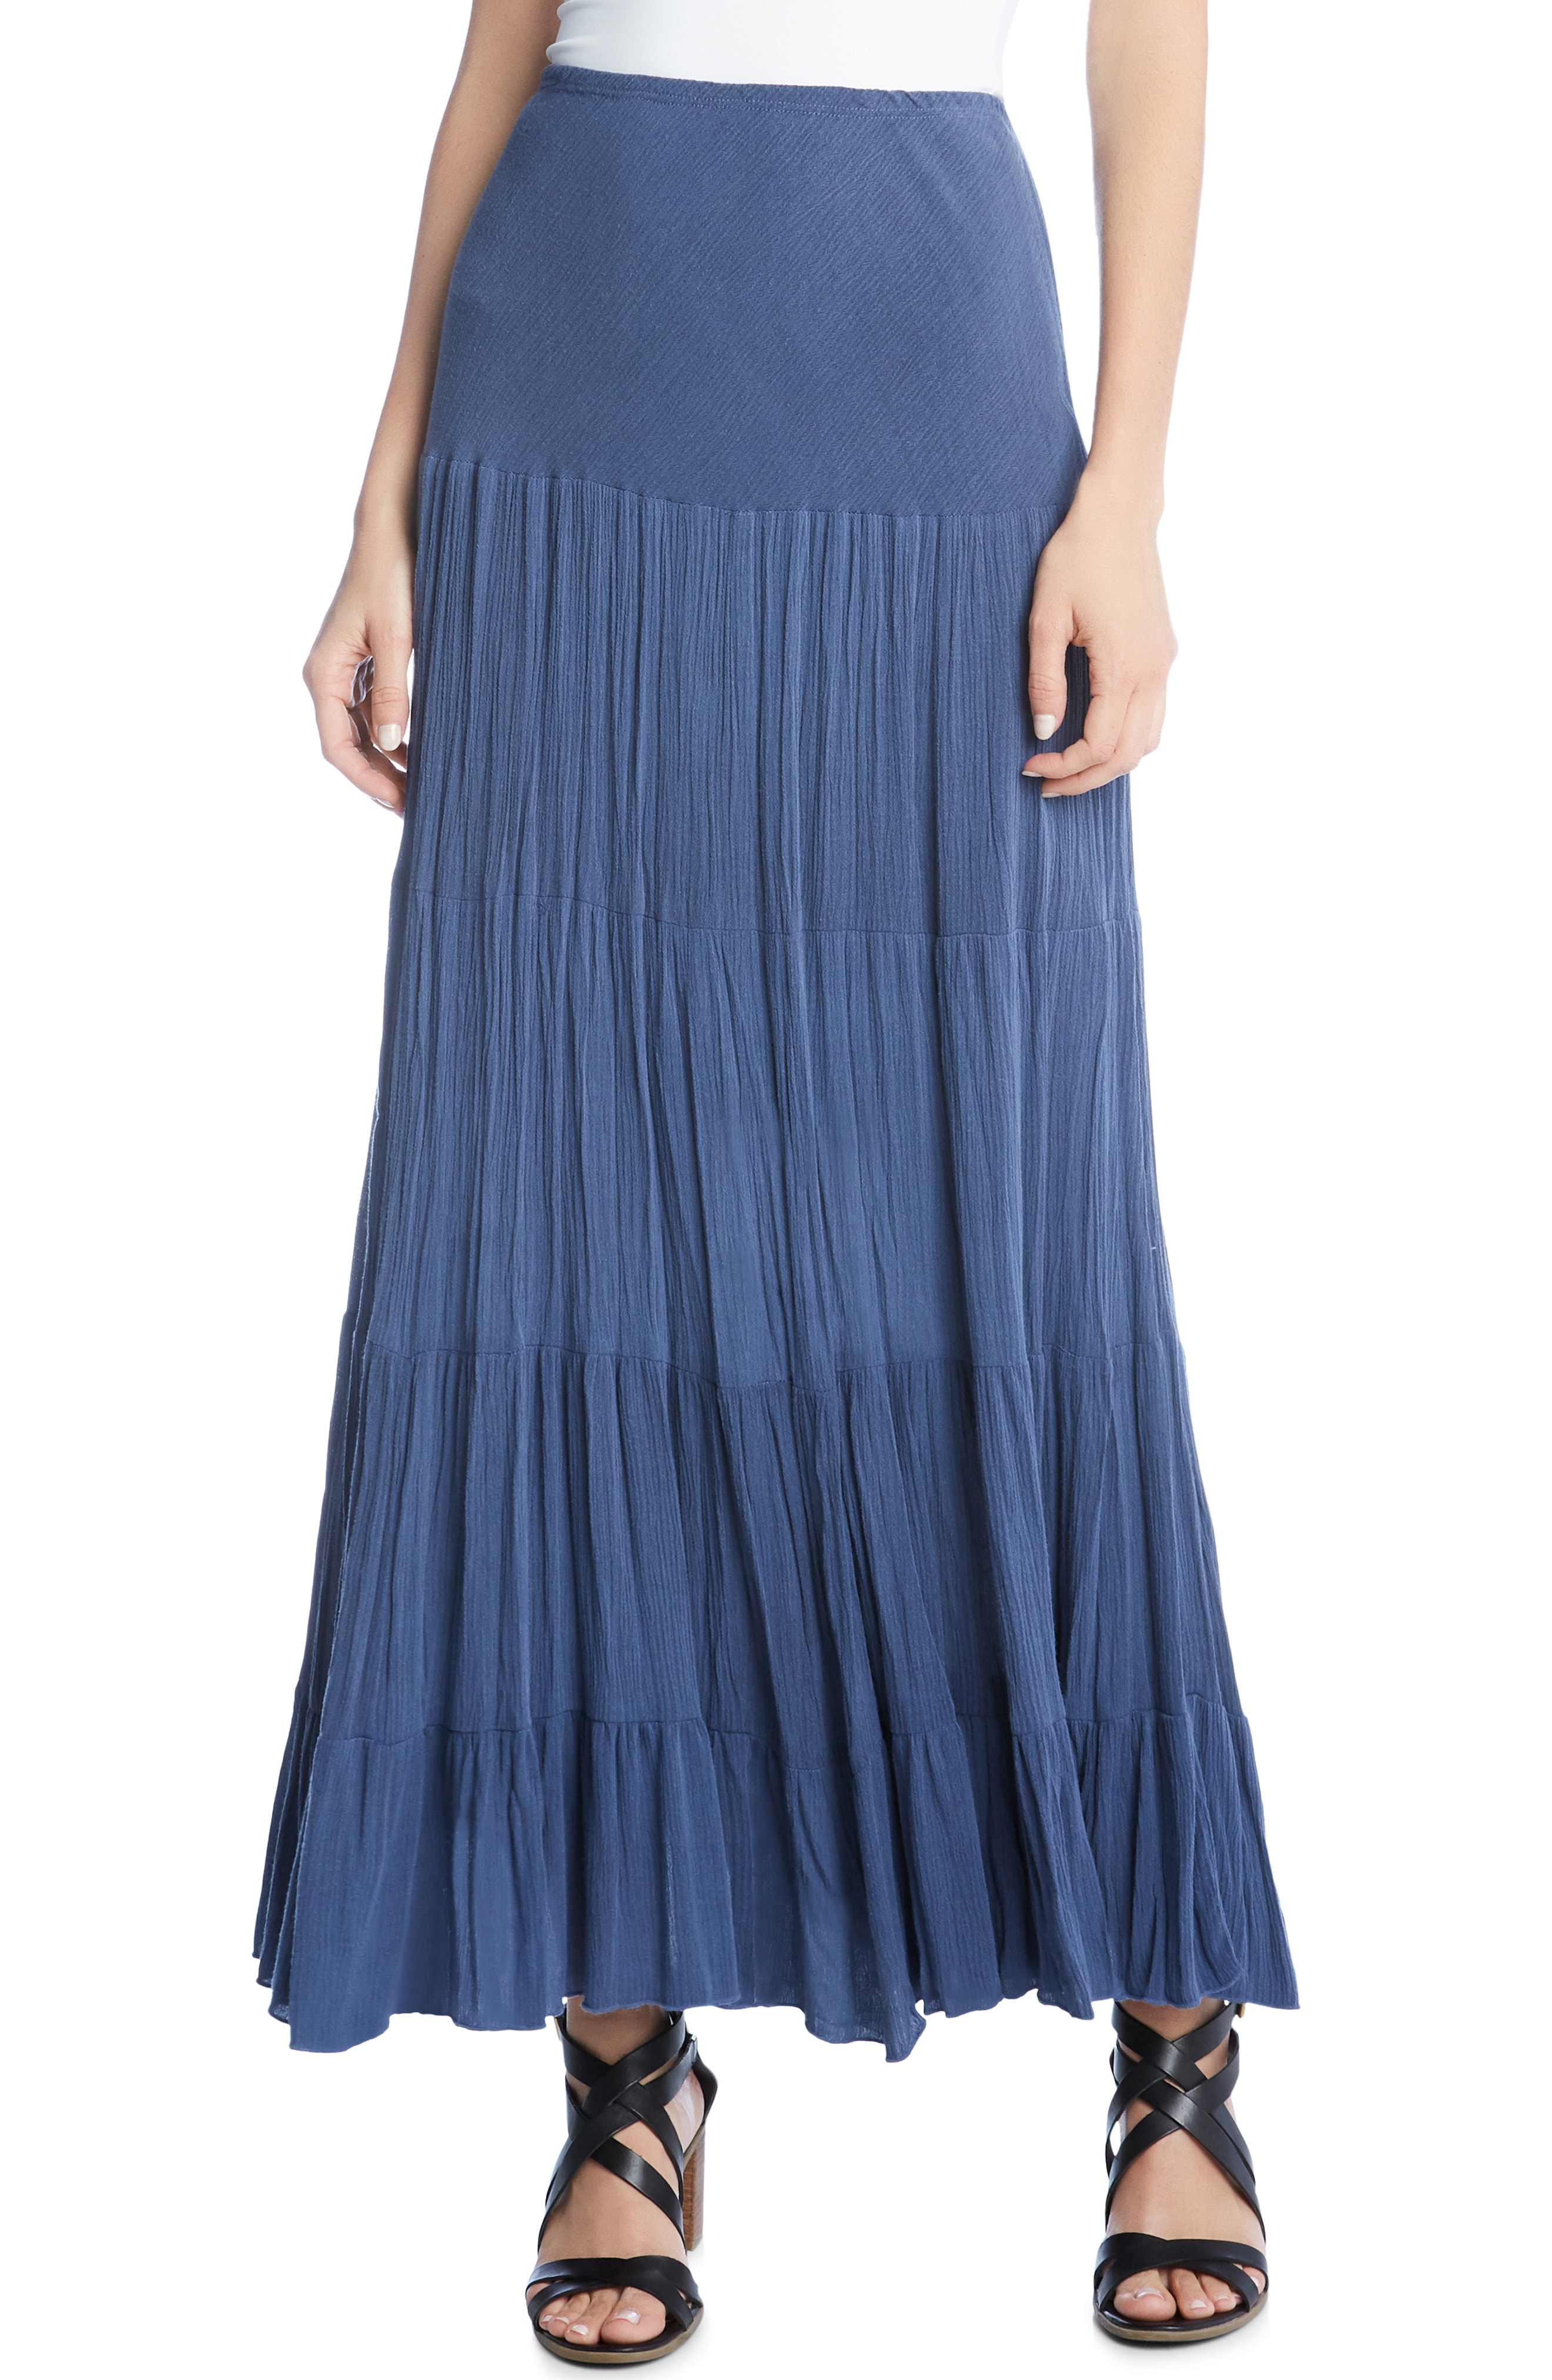 Sexy and elegant: the maxi skirt